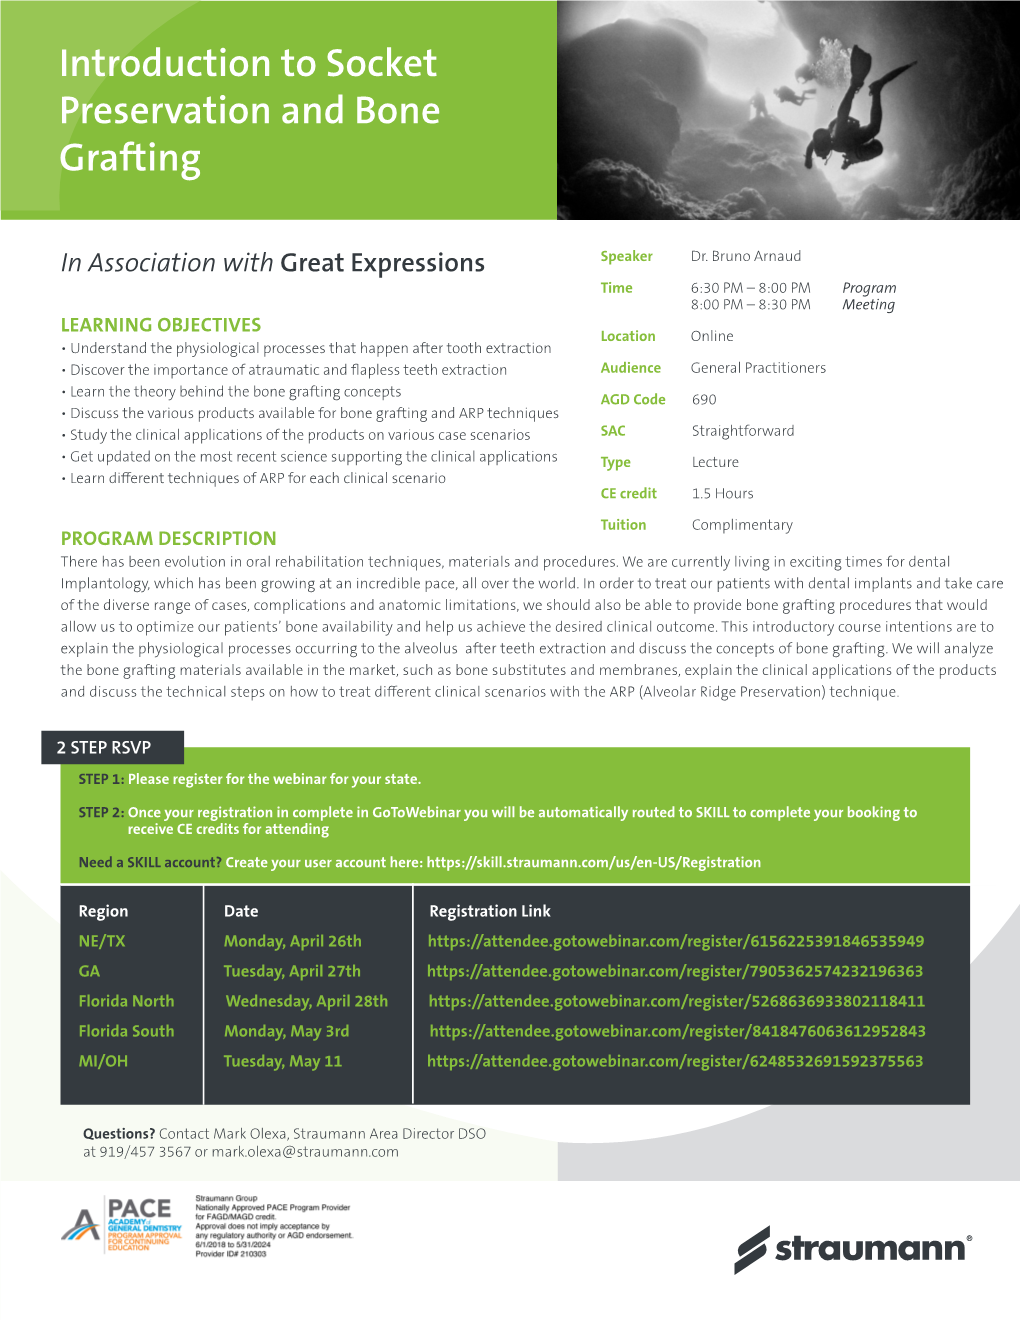 Introduction to Socket Preservation and Bone Grafting